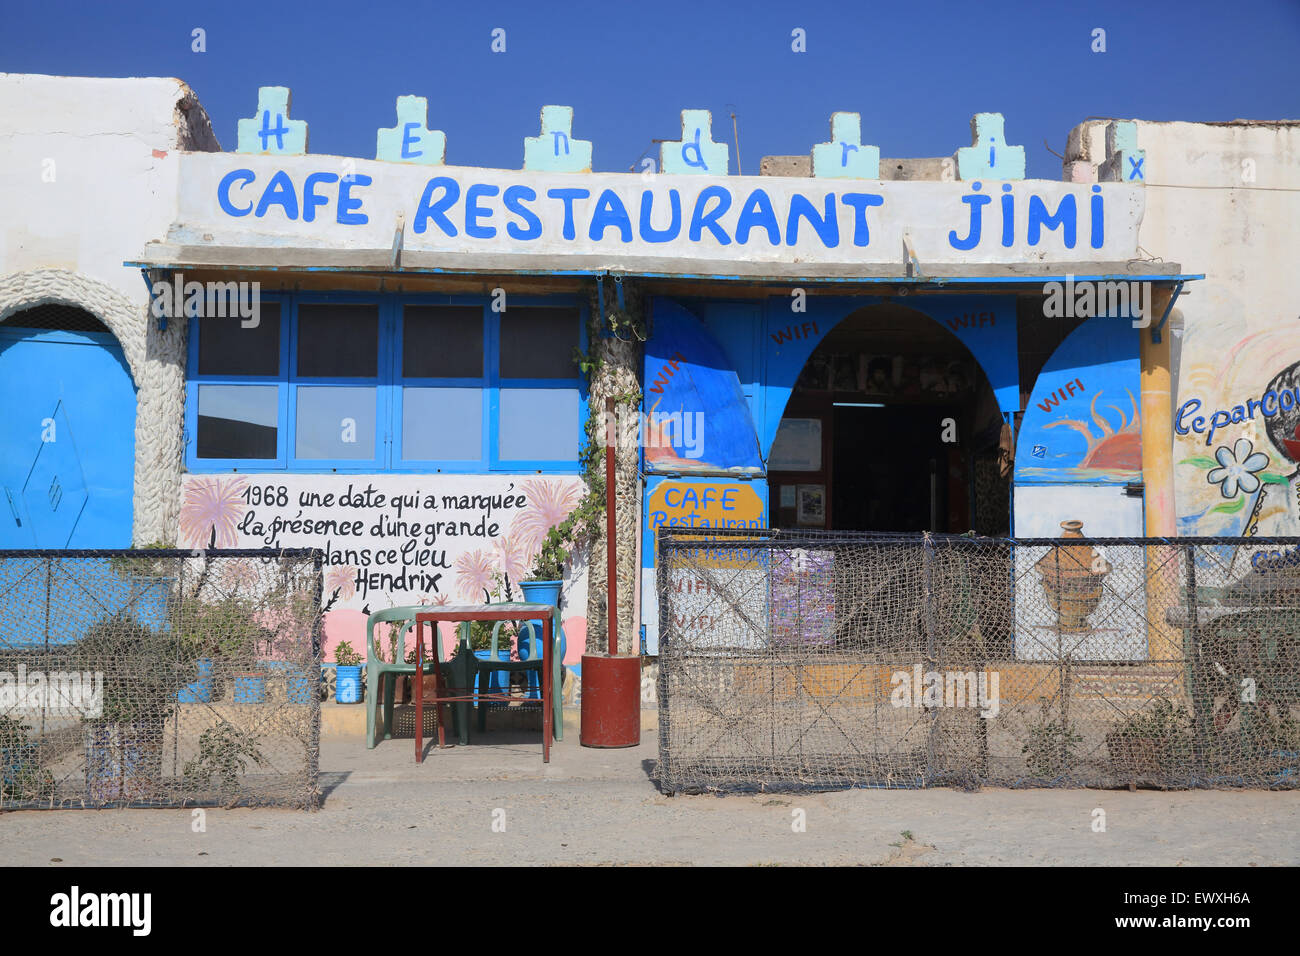 Cafe Restaurant Jimi Hendrix, in Diabat, the 1960s hippy town, near Essaouira, in Morocco, North Africa Stock Photo